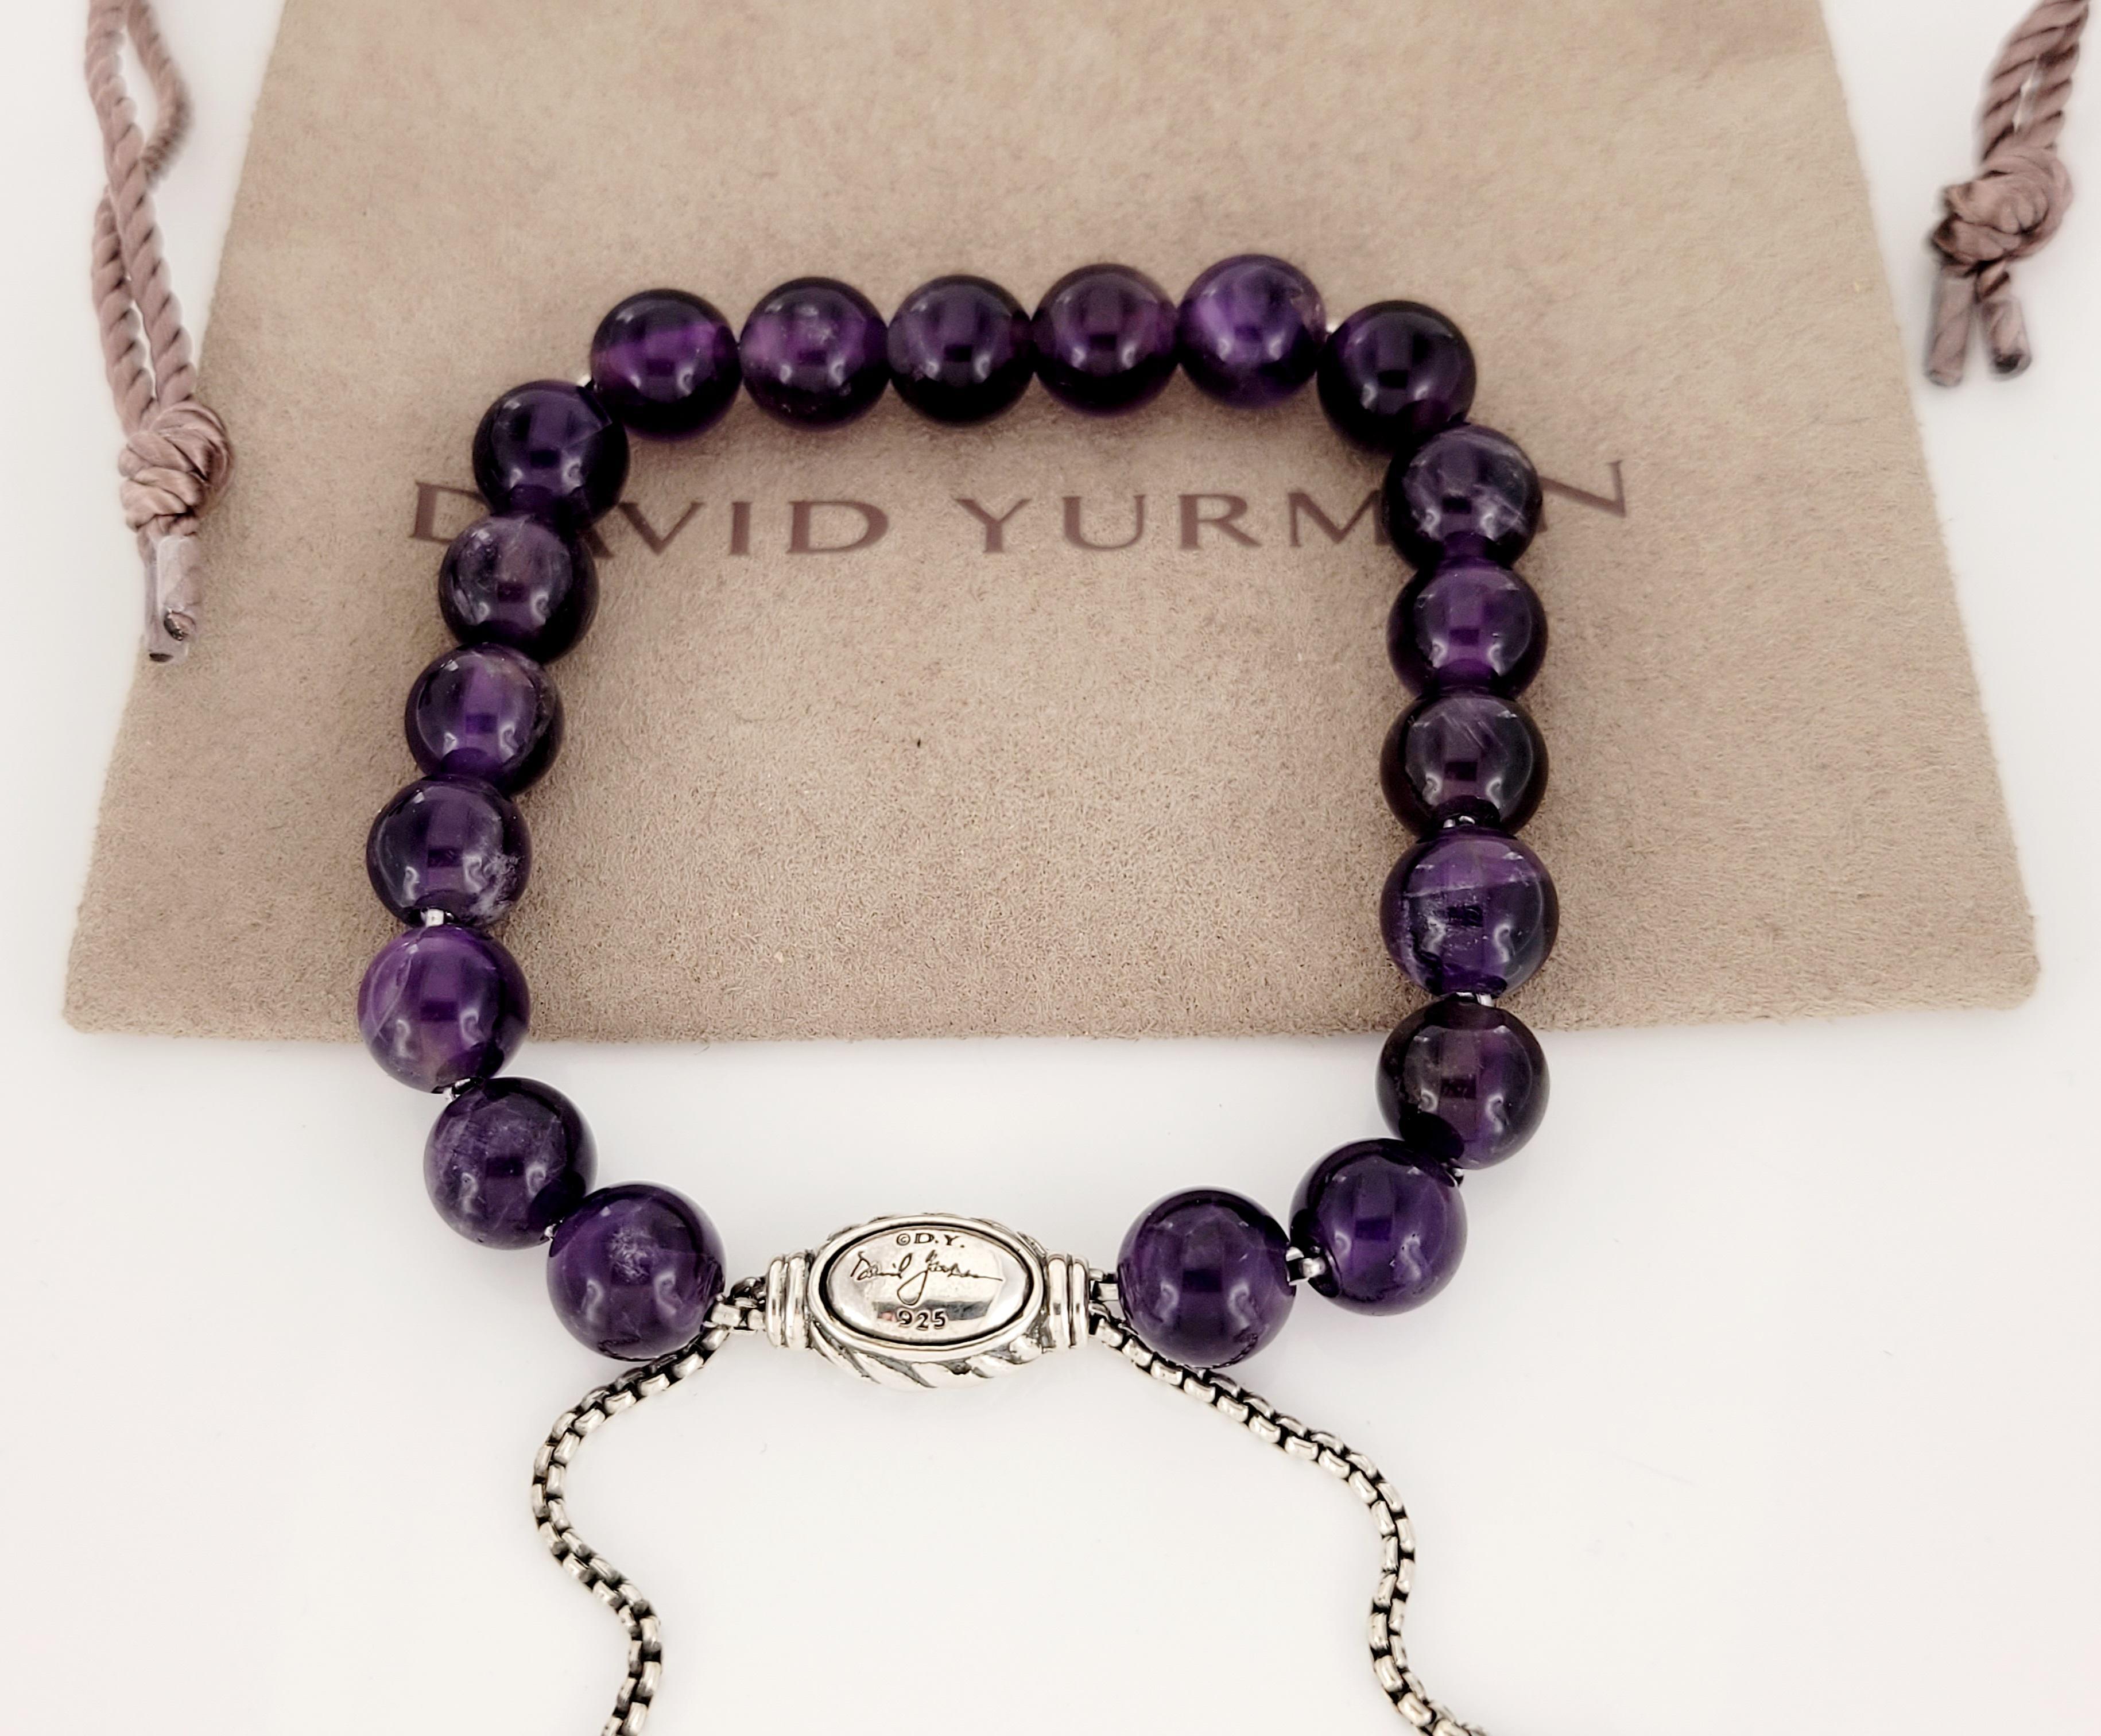 David Yurman Purple onyx Sterling Silver Spiritual bead bracelet 8mm In New Condition For Sale In New York, NY